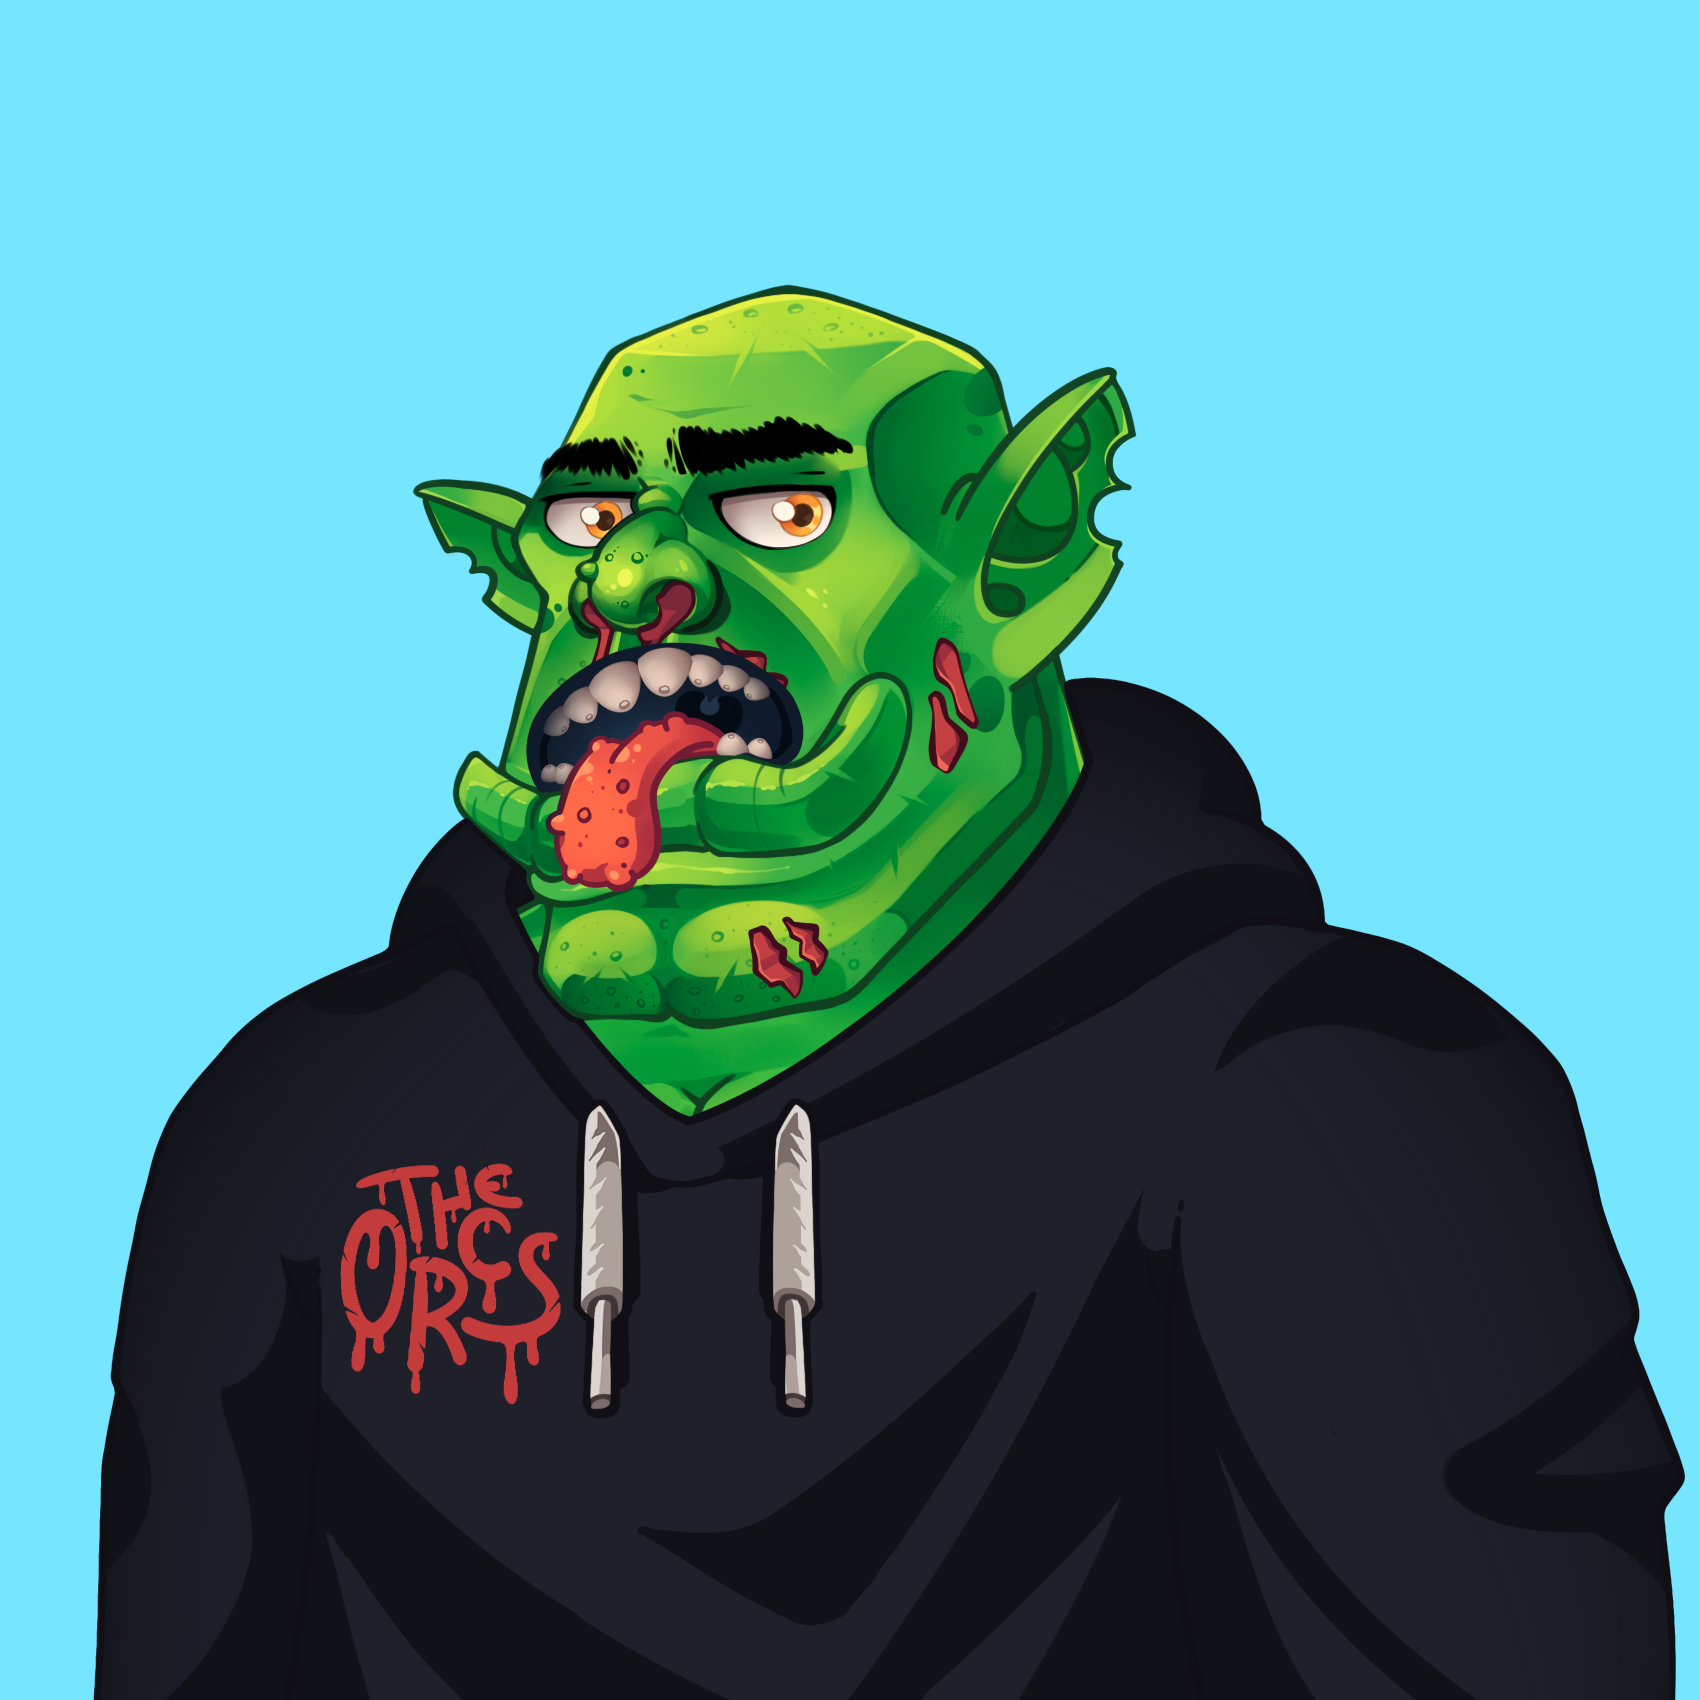 The Orcs #5302